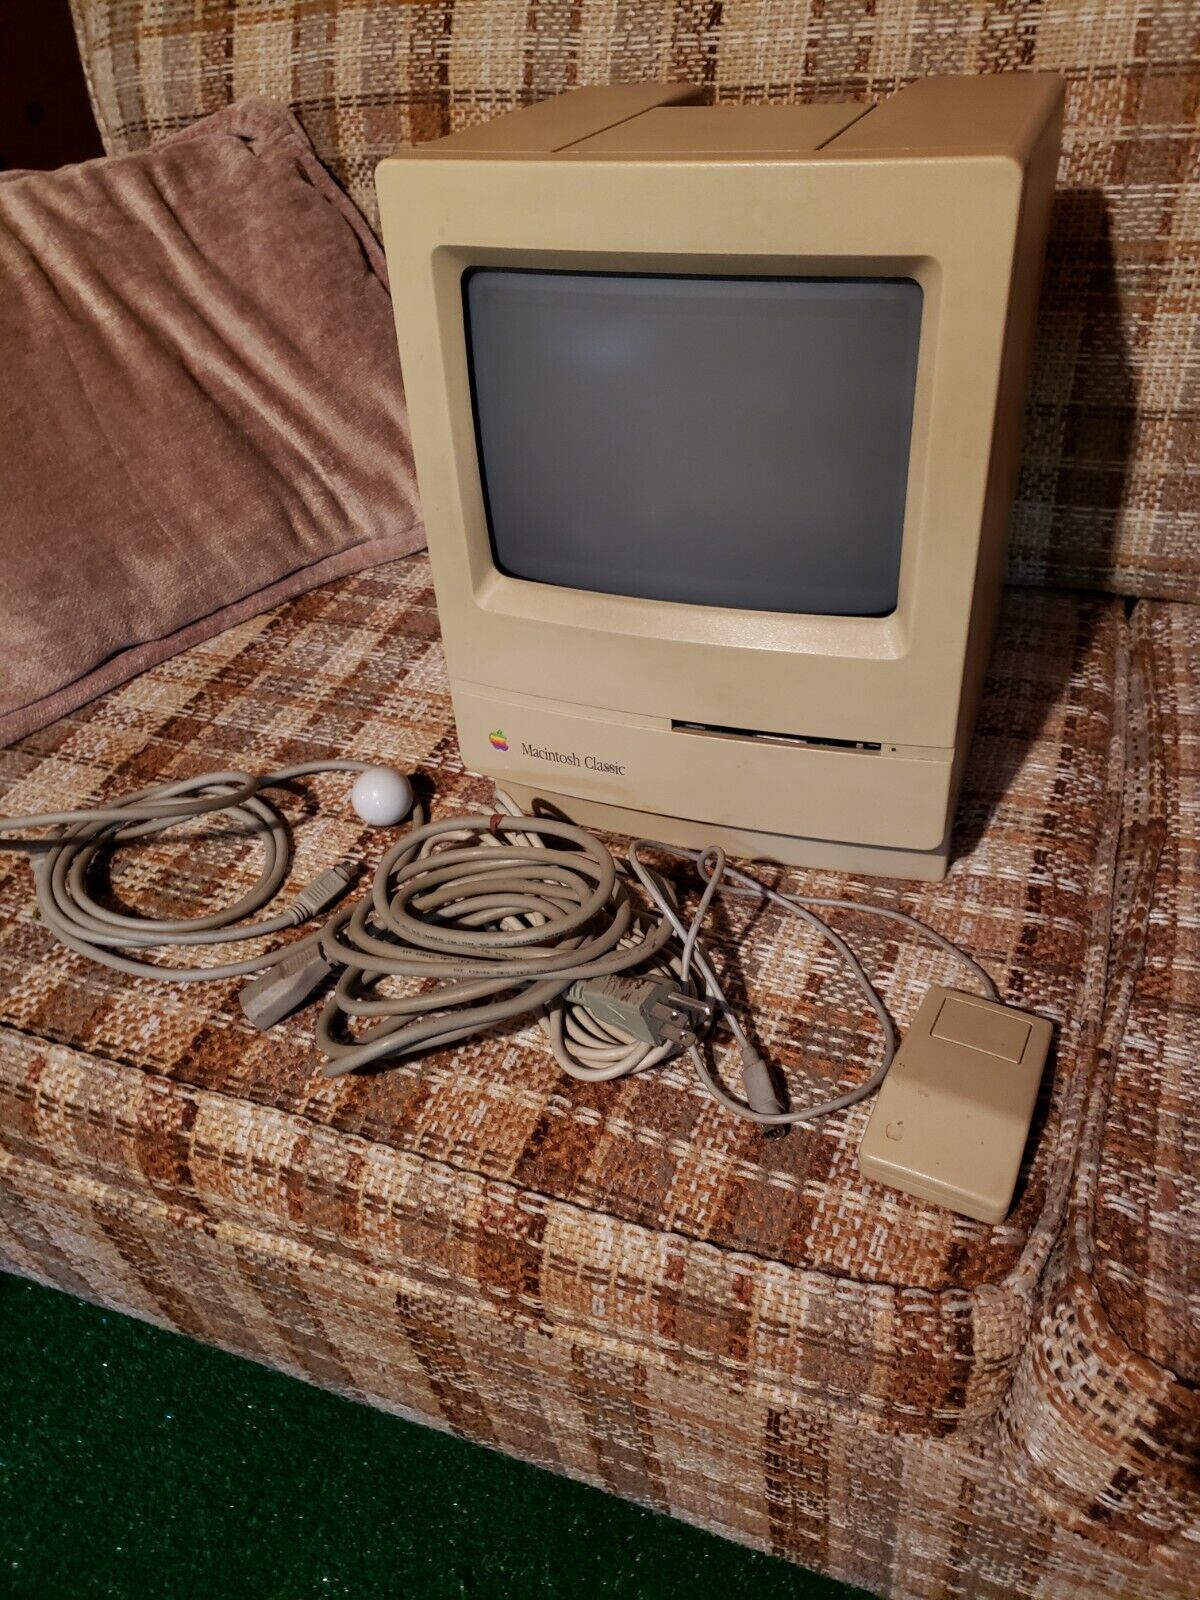 Apple Macintosh Classic Vintage Computer M0420 from 1990